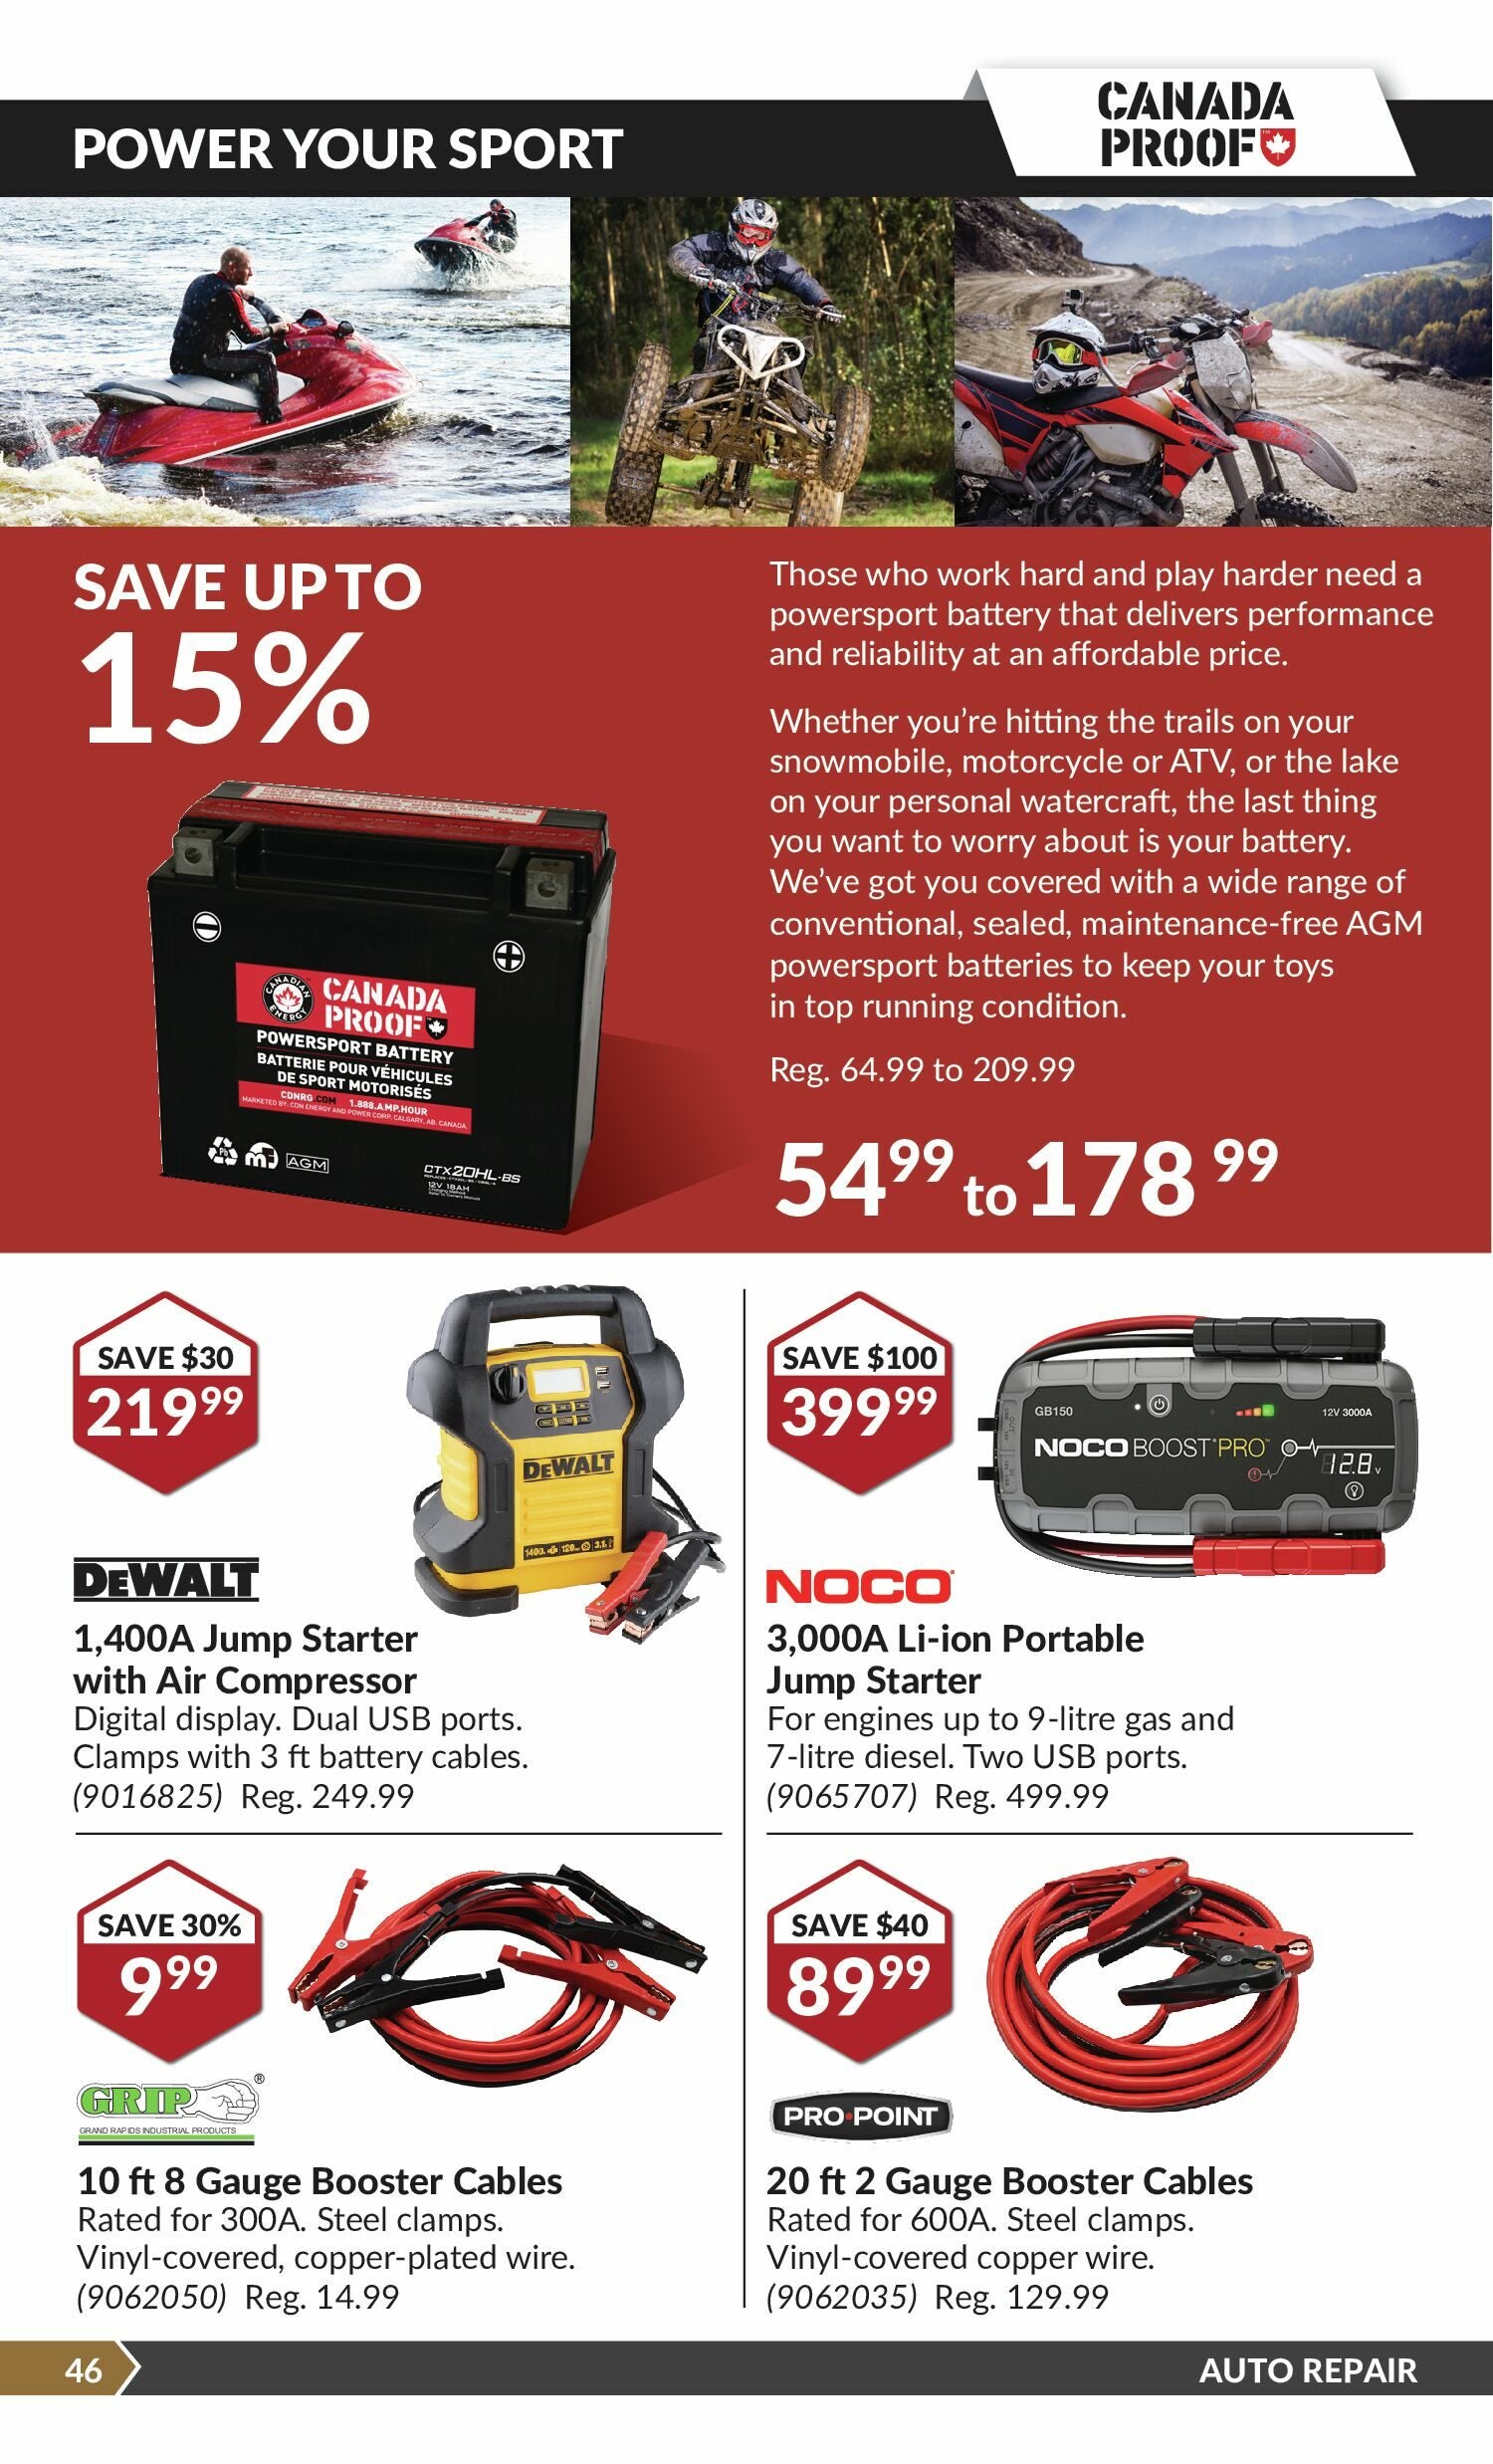 Princess Auto Weekly Flyer - 2 Week Sale - Gear Up For Fall